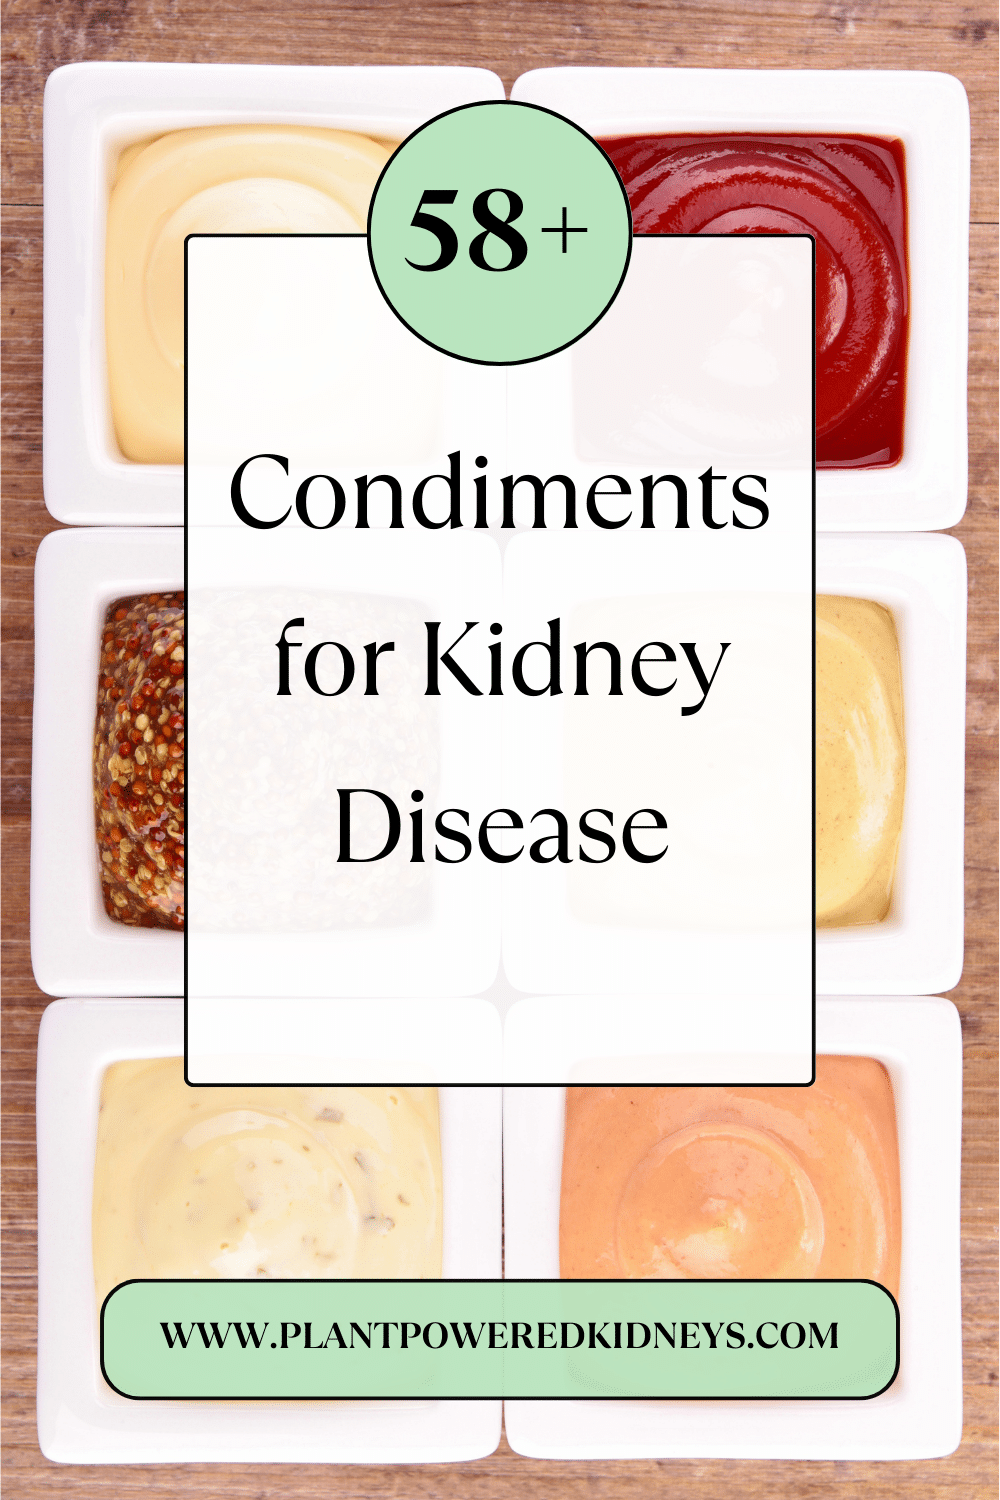 58+ Condiments for Kidney Disease
(Image description: square ramekins, touching side-by-side, filled will various condiments)